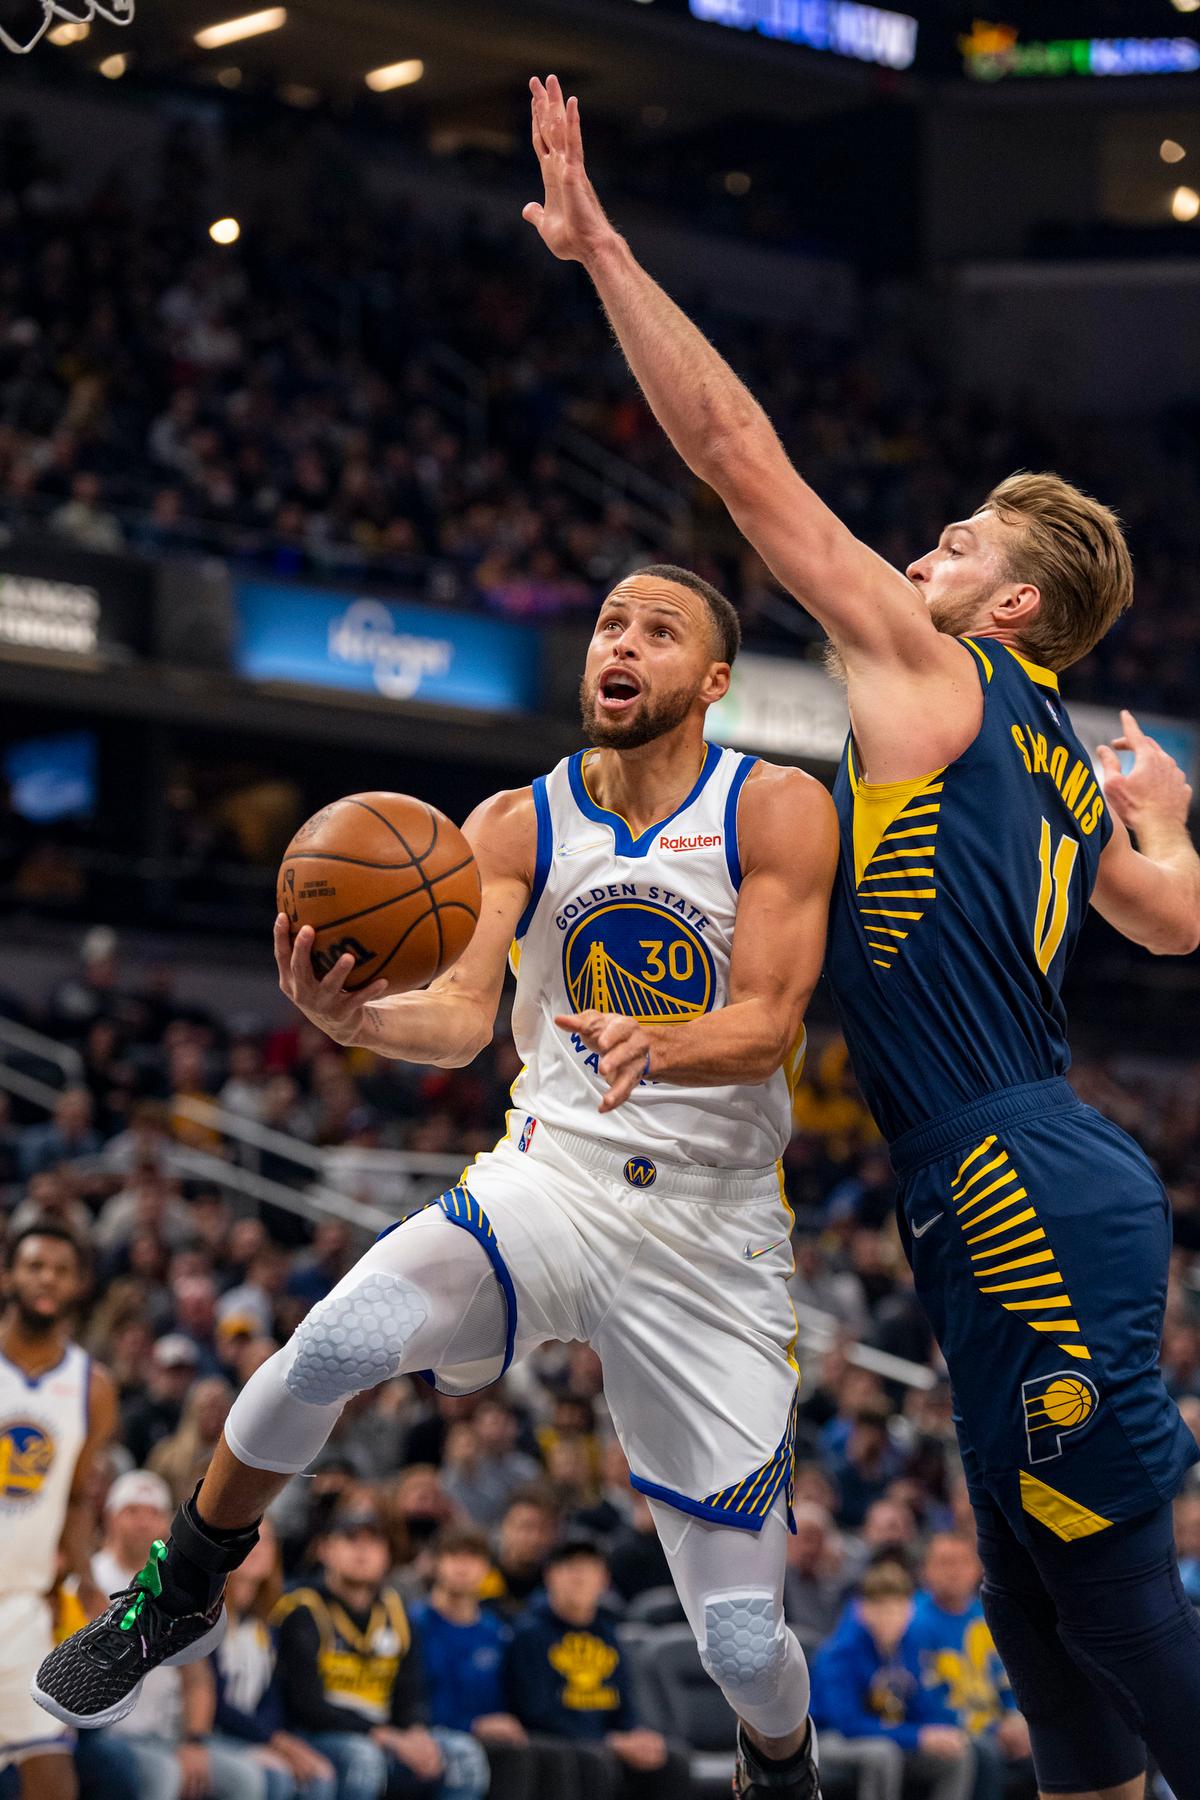 Golden State Warriors guard Stephen Curry (30) slips under the defense of Indiana Pacers forward Domantas Sabonis (11) for a scoring attempt during the first half of an NBA basketball game in Indianapolis, on Dec. 13, 2021. (Doug McSchooler/AP Photo)